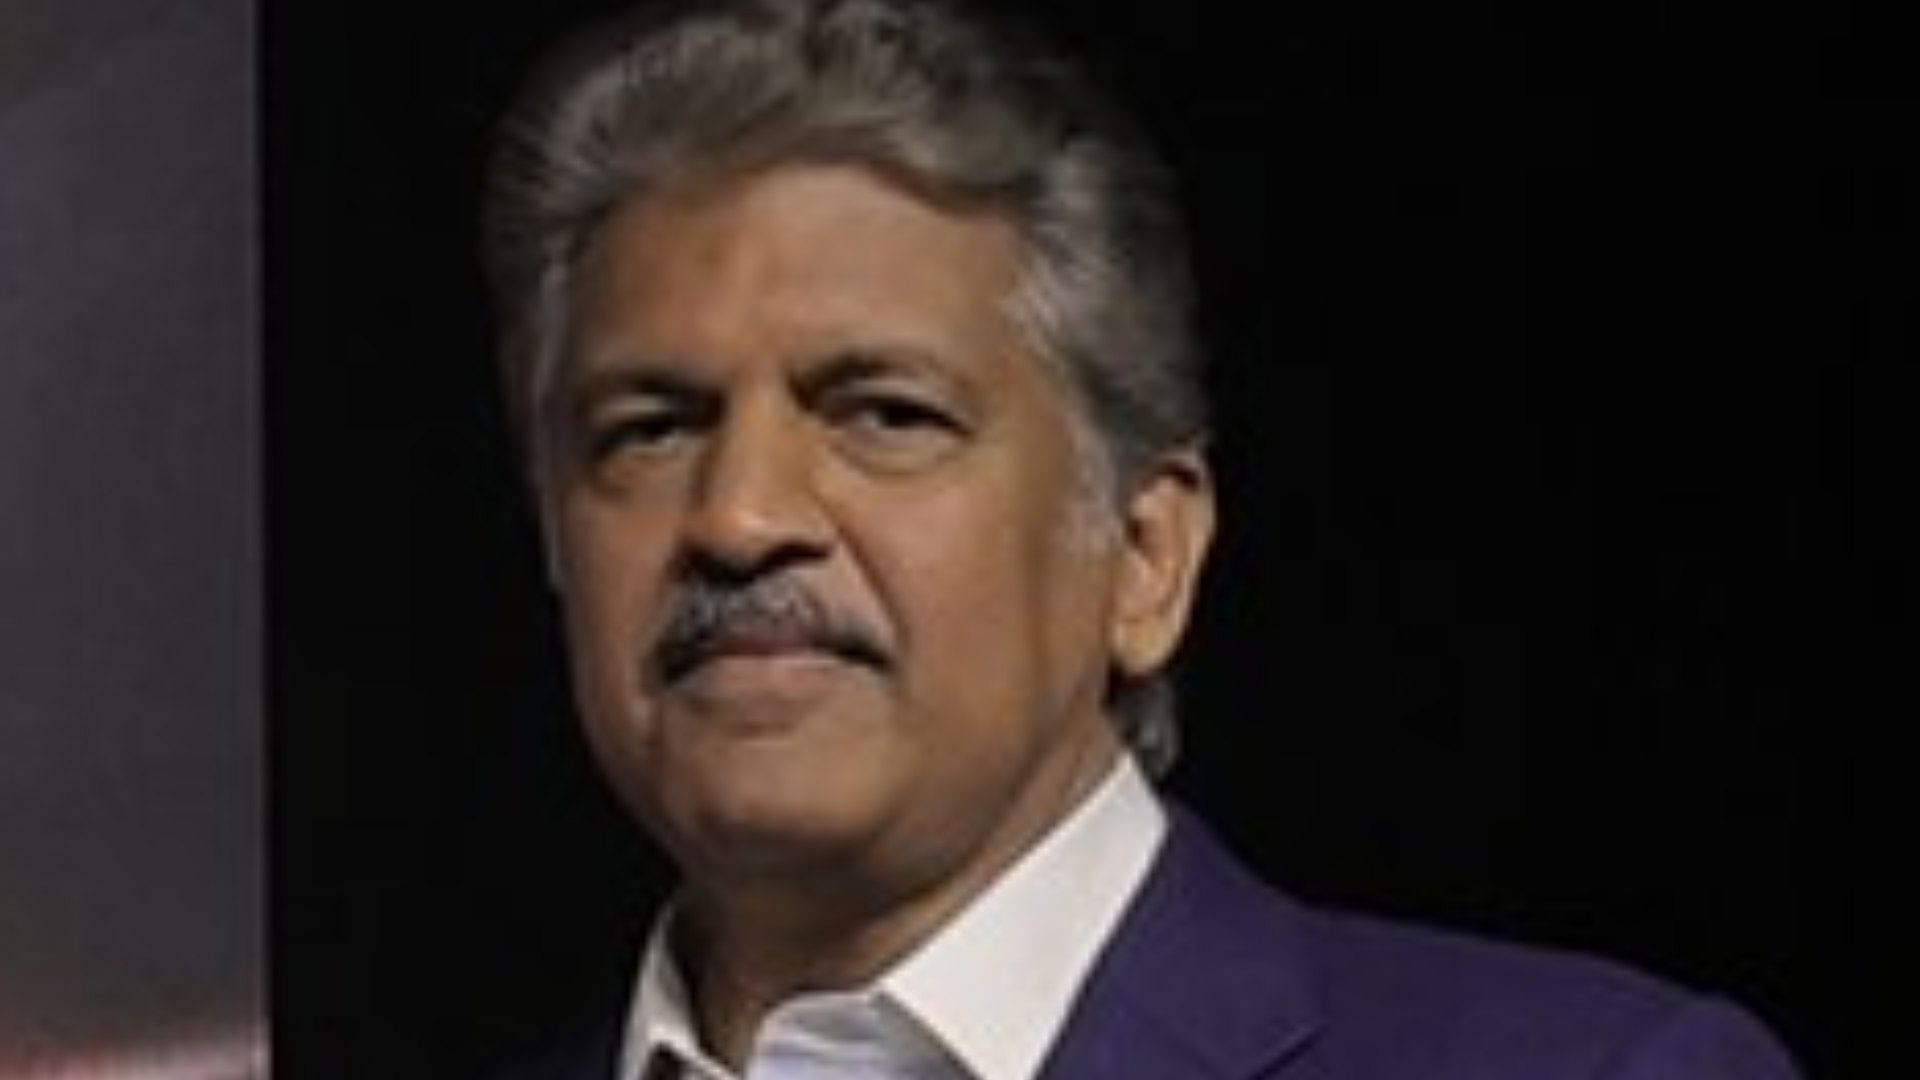 'Grateful my name is Mahi-ndra', Anand Mahindra after Dhoni smashed hattrick of sixes in CSK vs MI